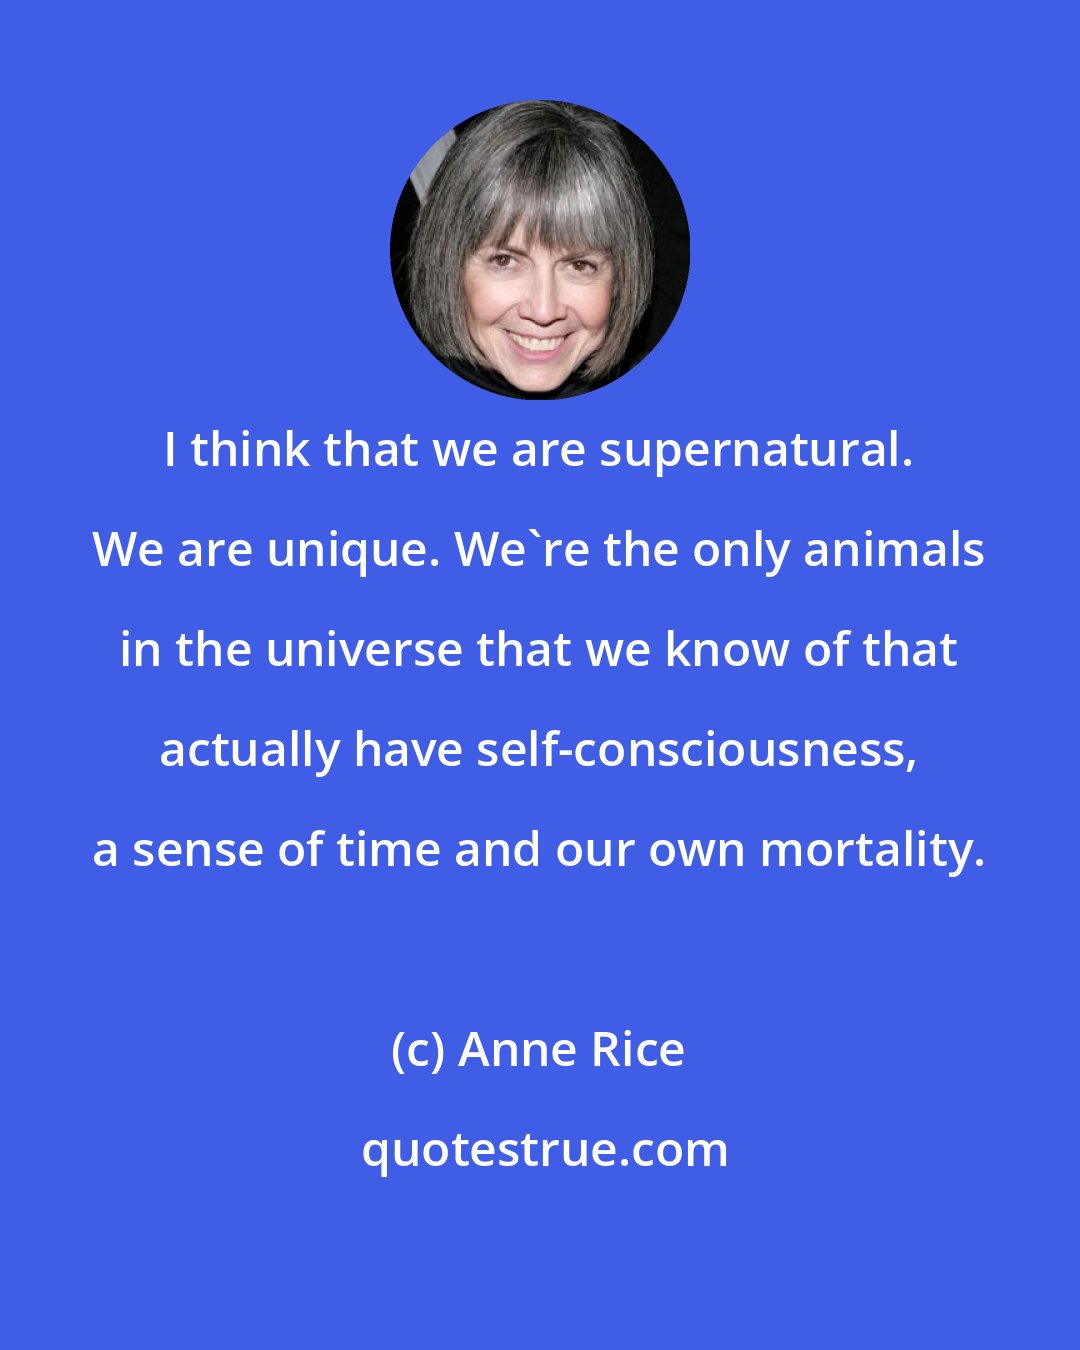 Anne Rice: I think that we are supernatural. We are unique. We're the only animals in the universe that we know of that actually have self-consciousness, a sense of time and our own mortality.